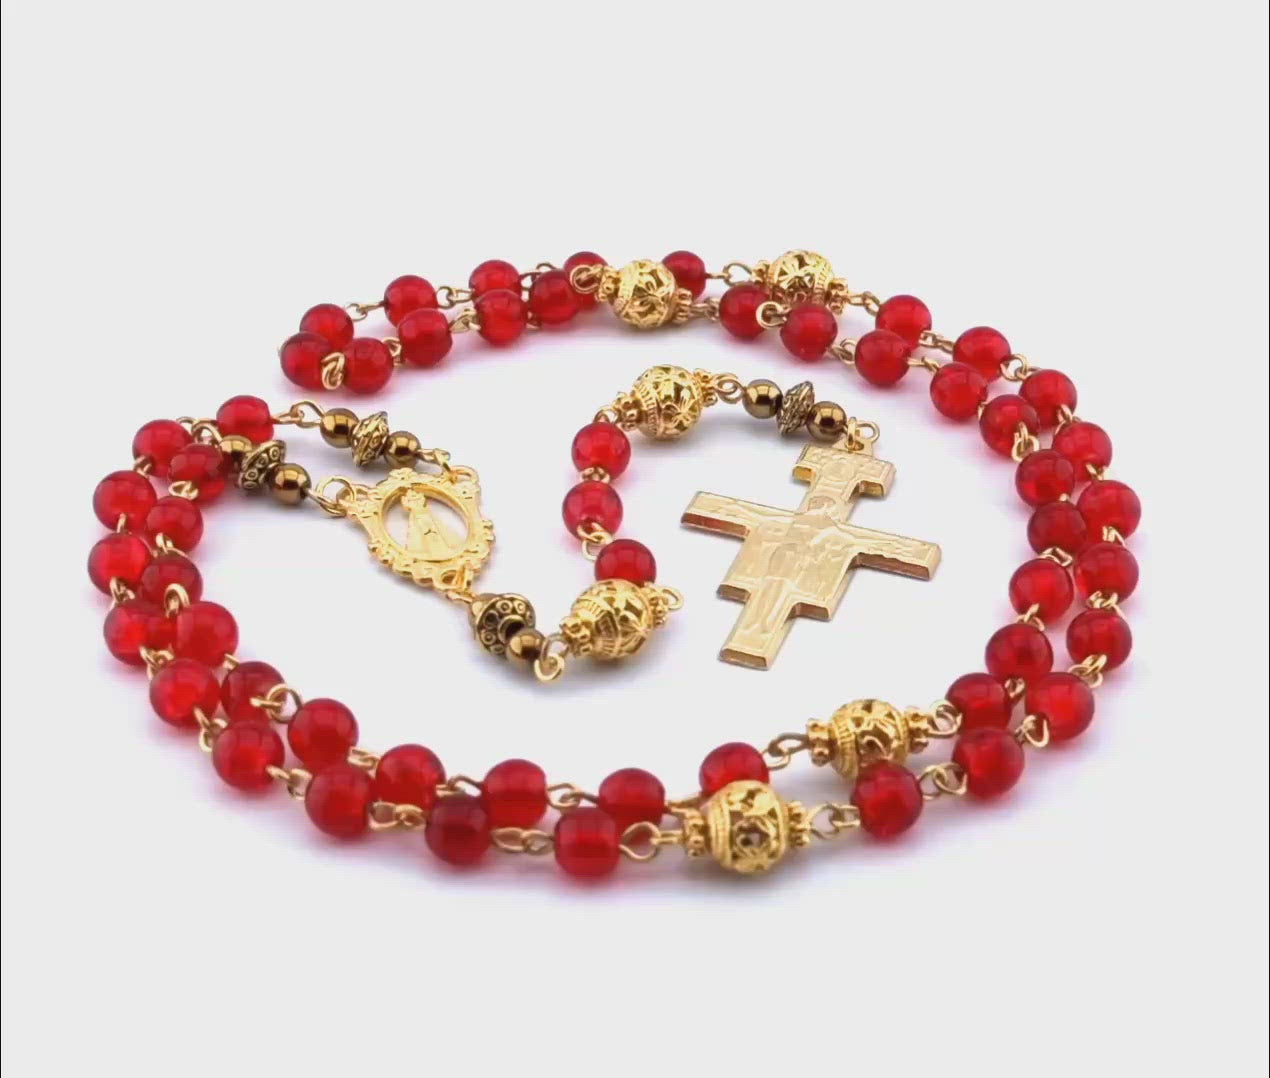 Our Lady of Loretto unique rosary beads with red glass and gold beads, golden Saint Francis crucifix and centre medal.